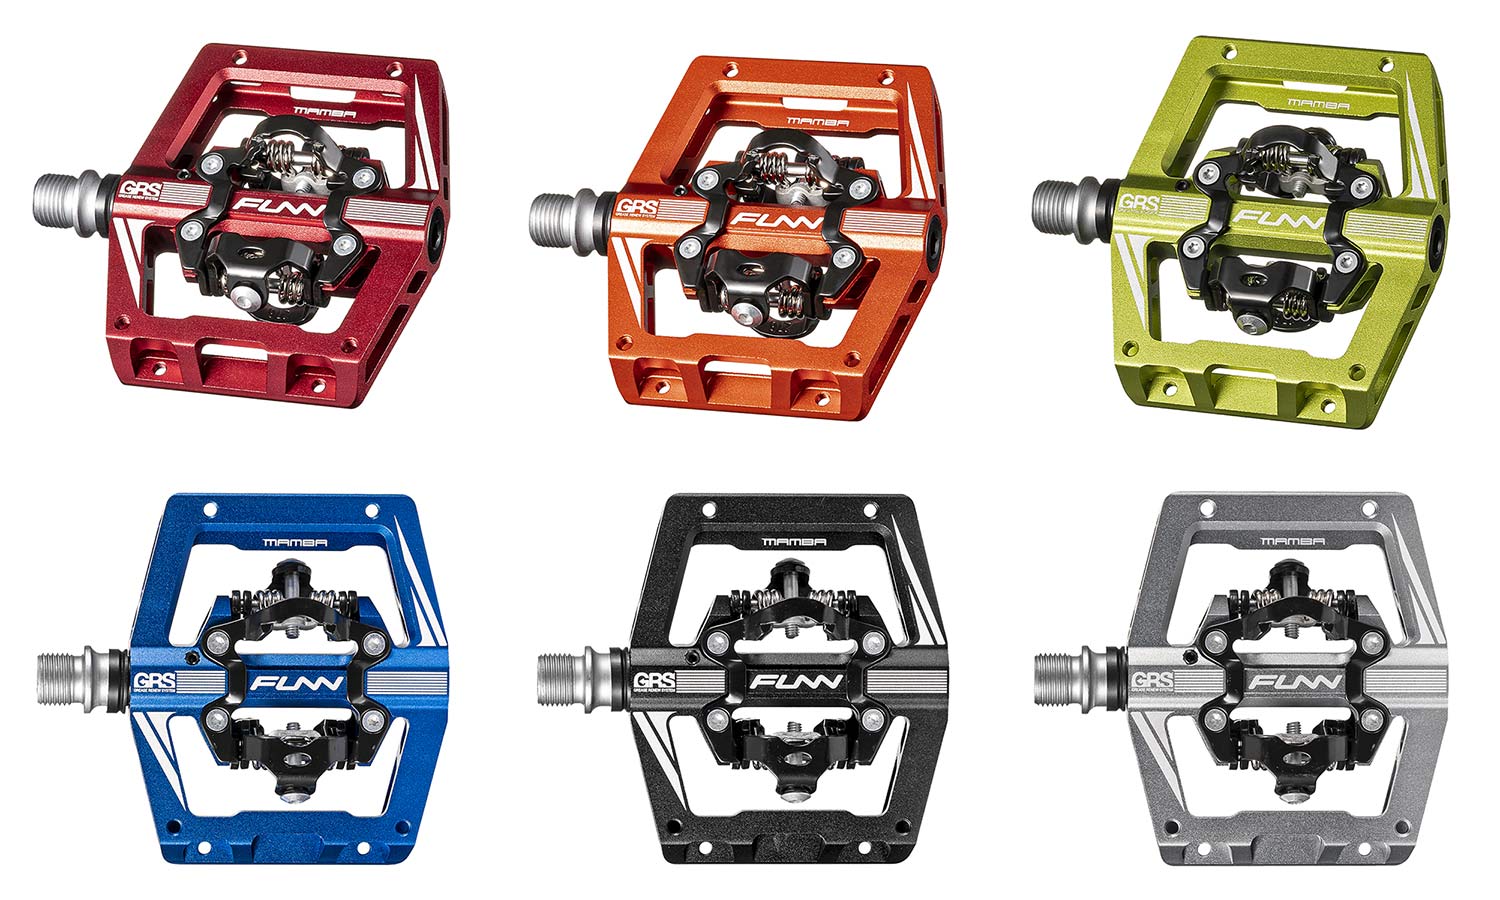 Funn Mamba S clipless platform pedals, lighter 1-sided or 2-sided trail enduro all-mountain bike pedals, colors